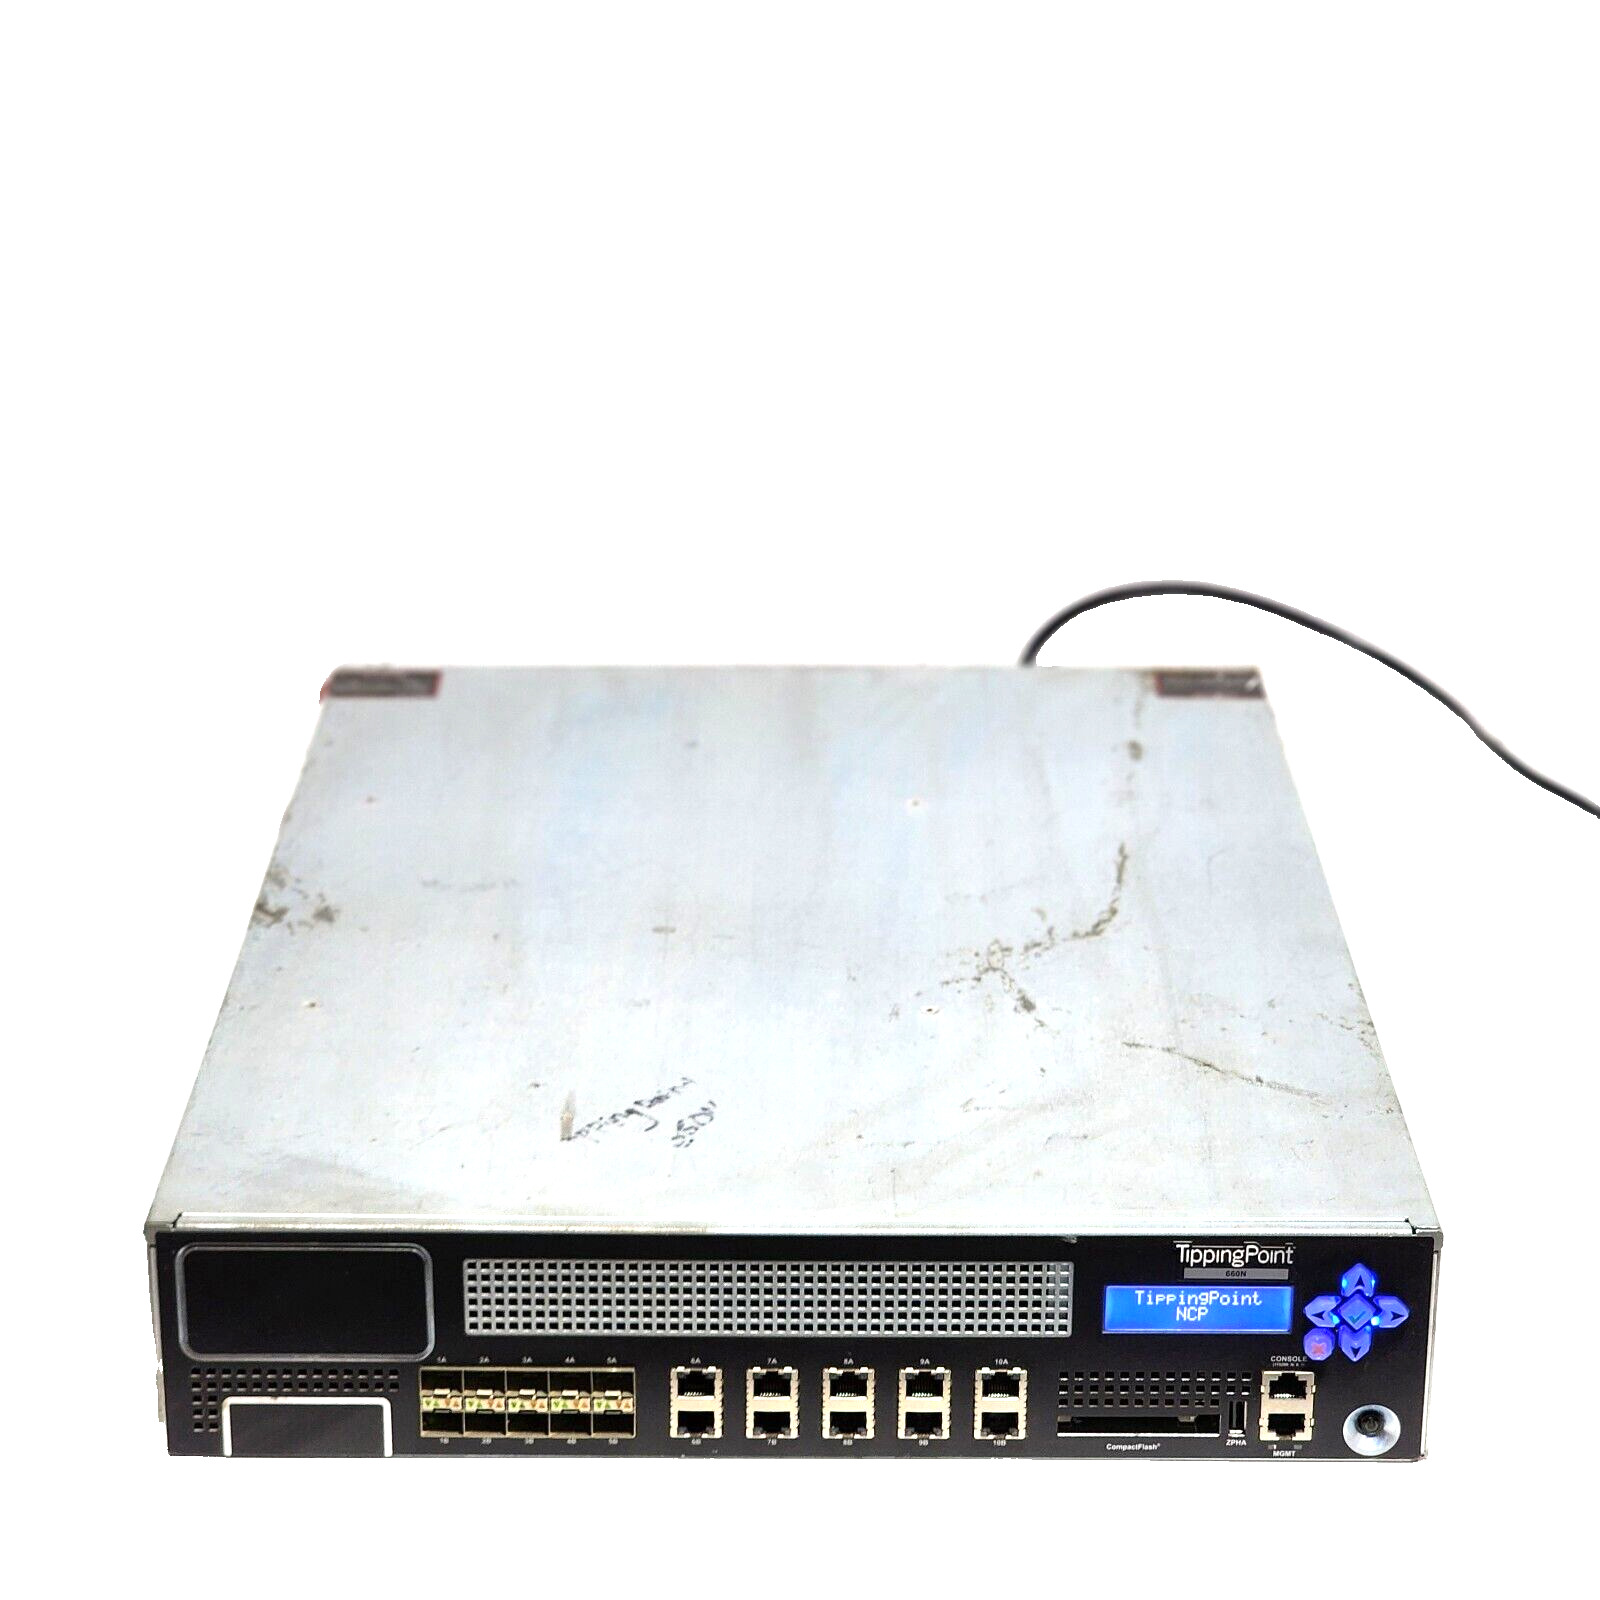 HP TippingPoint Intrusion Prevention System 660N XLR532 34 X 1200